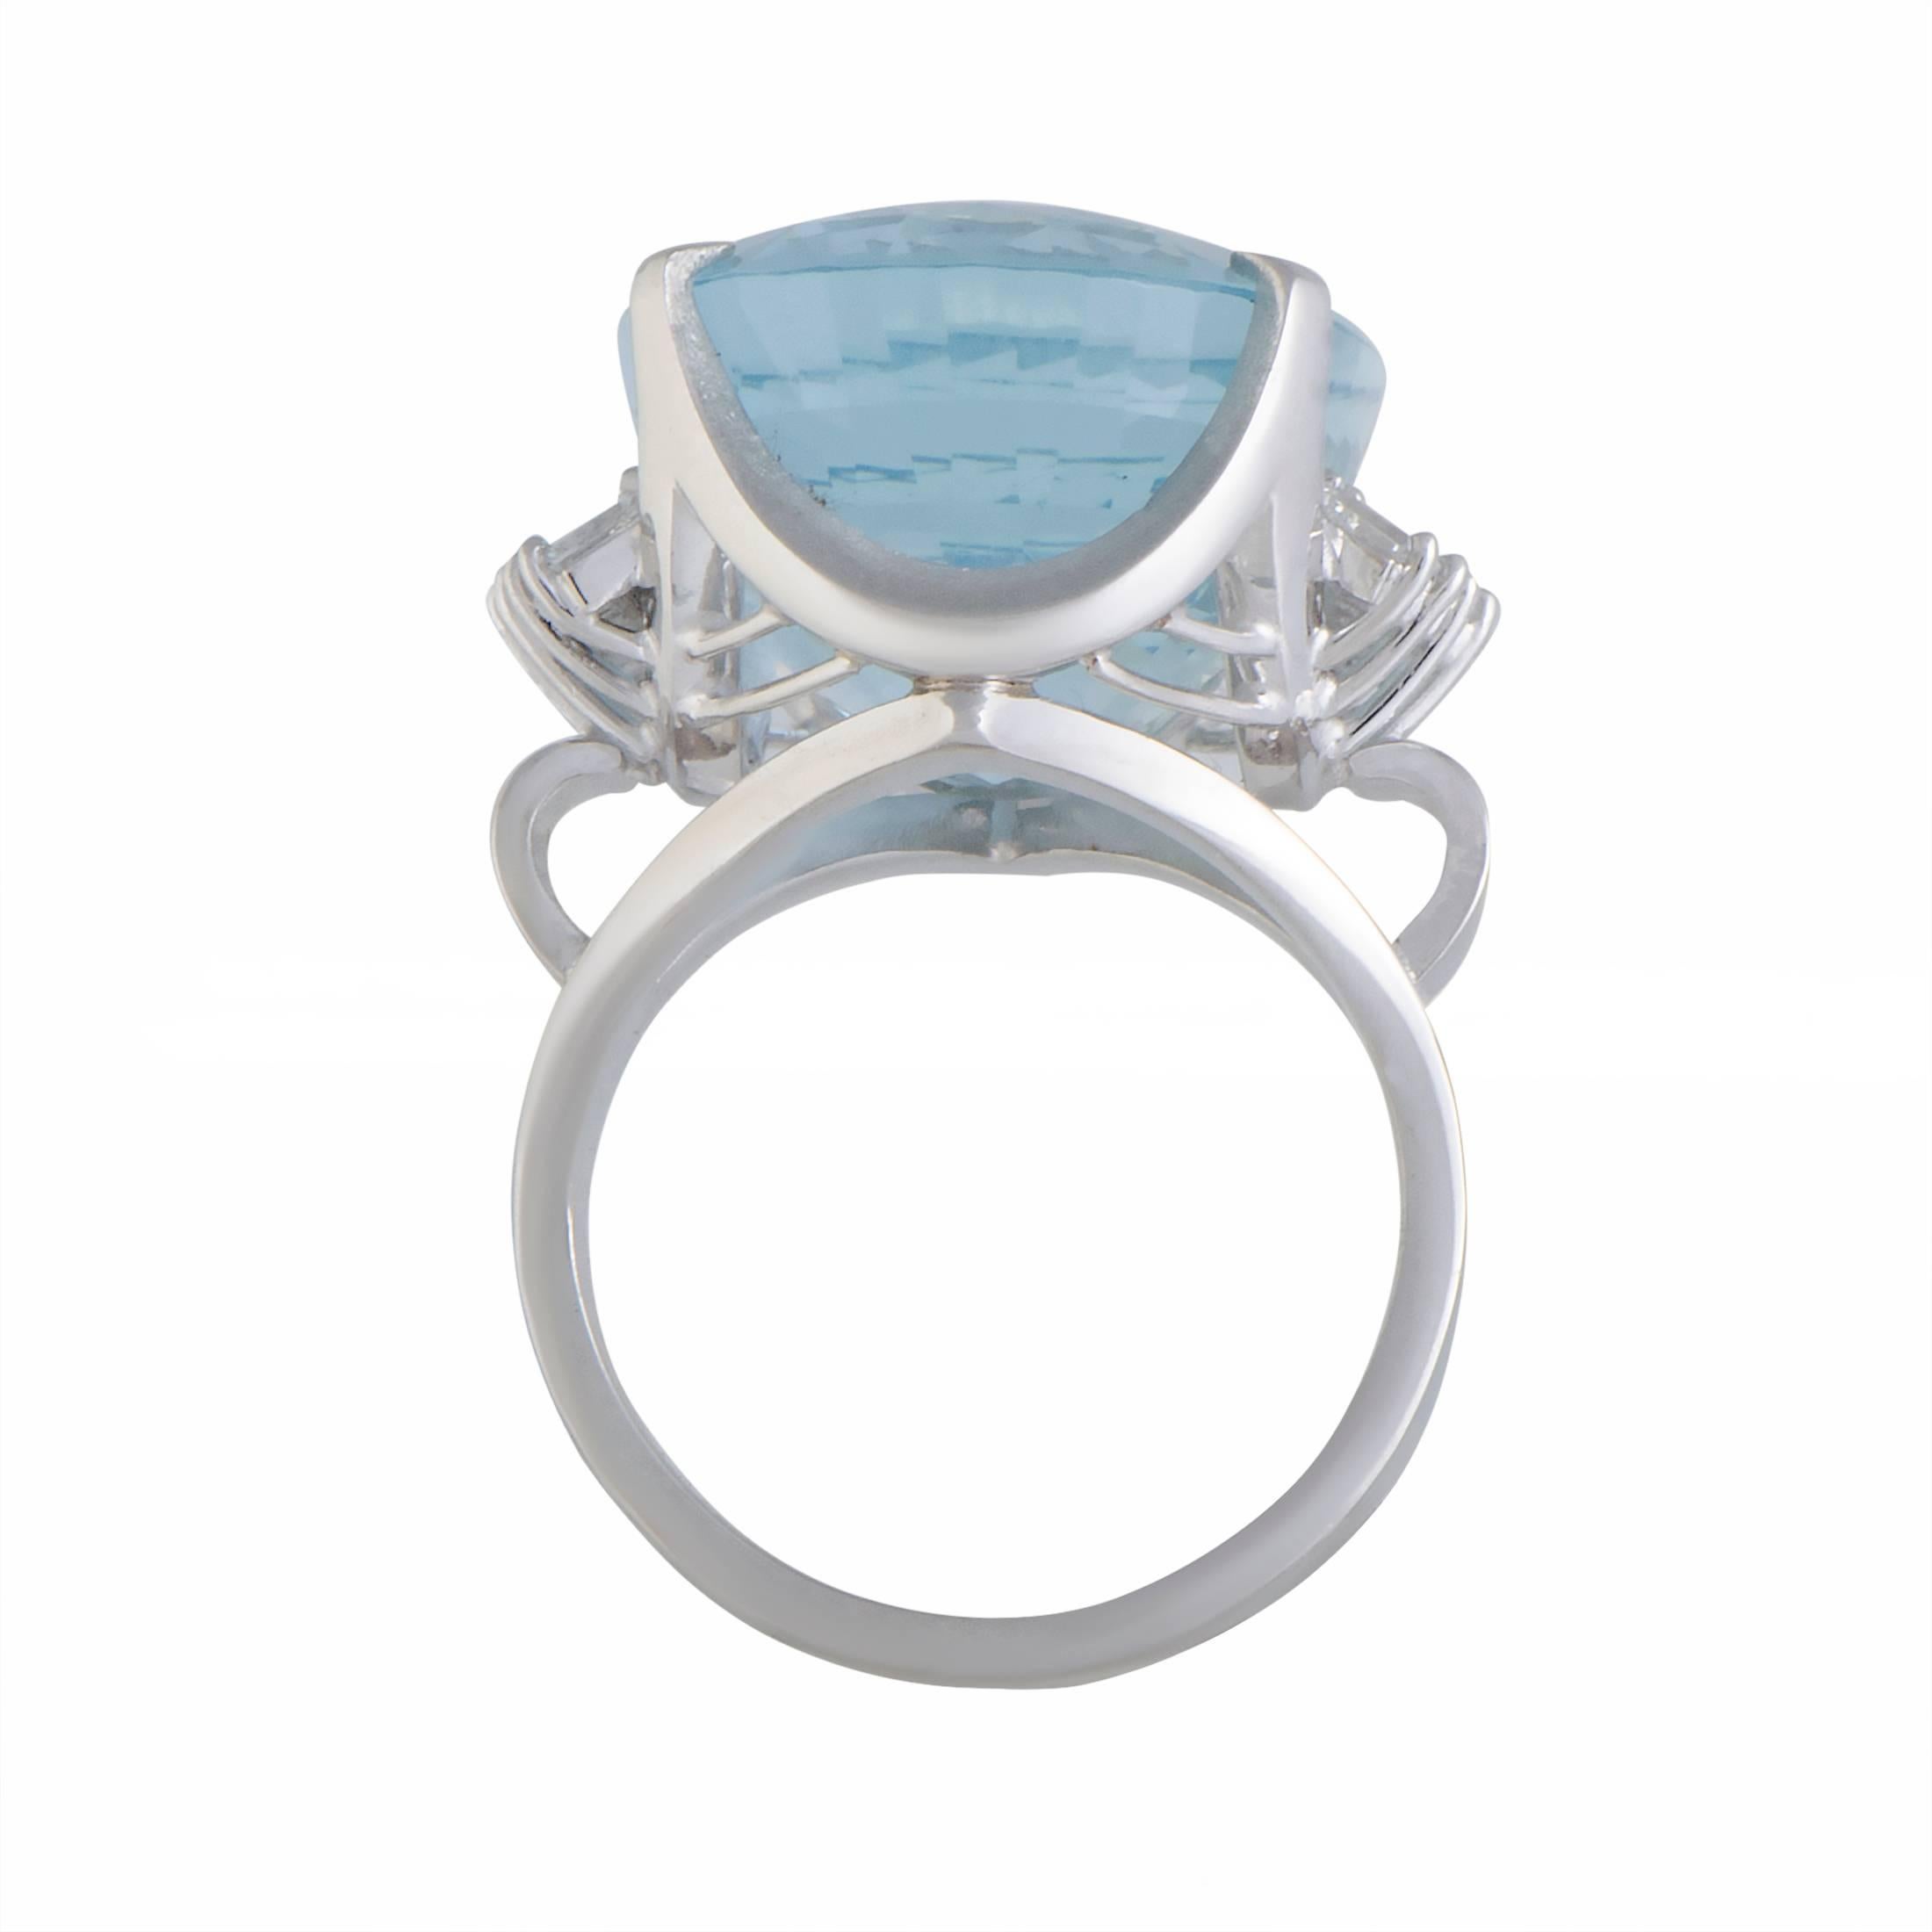 Gorgeously designed and wonderfully decorated, this platinum ring boasts an exceptionally prestigious and refined appeal. The beautiful ring is adorned with a 24.96ct mesmerizing aquamarine stone and 0.73ct of sparkling diamonds that give the ring